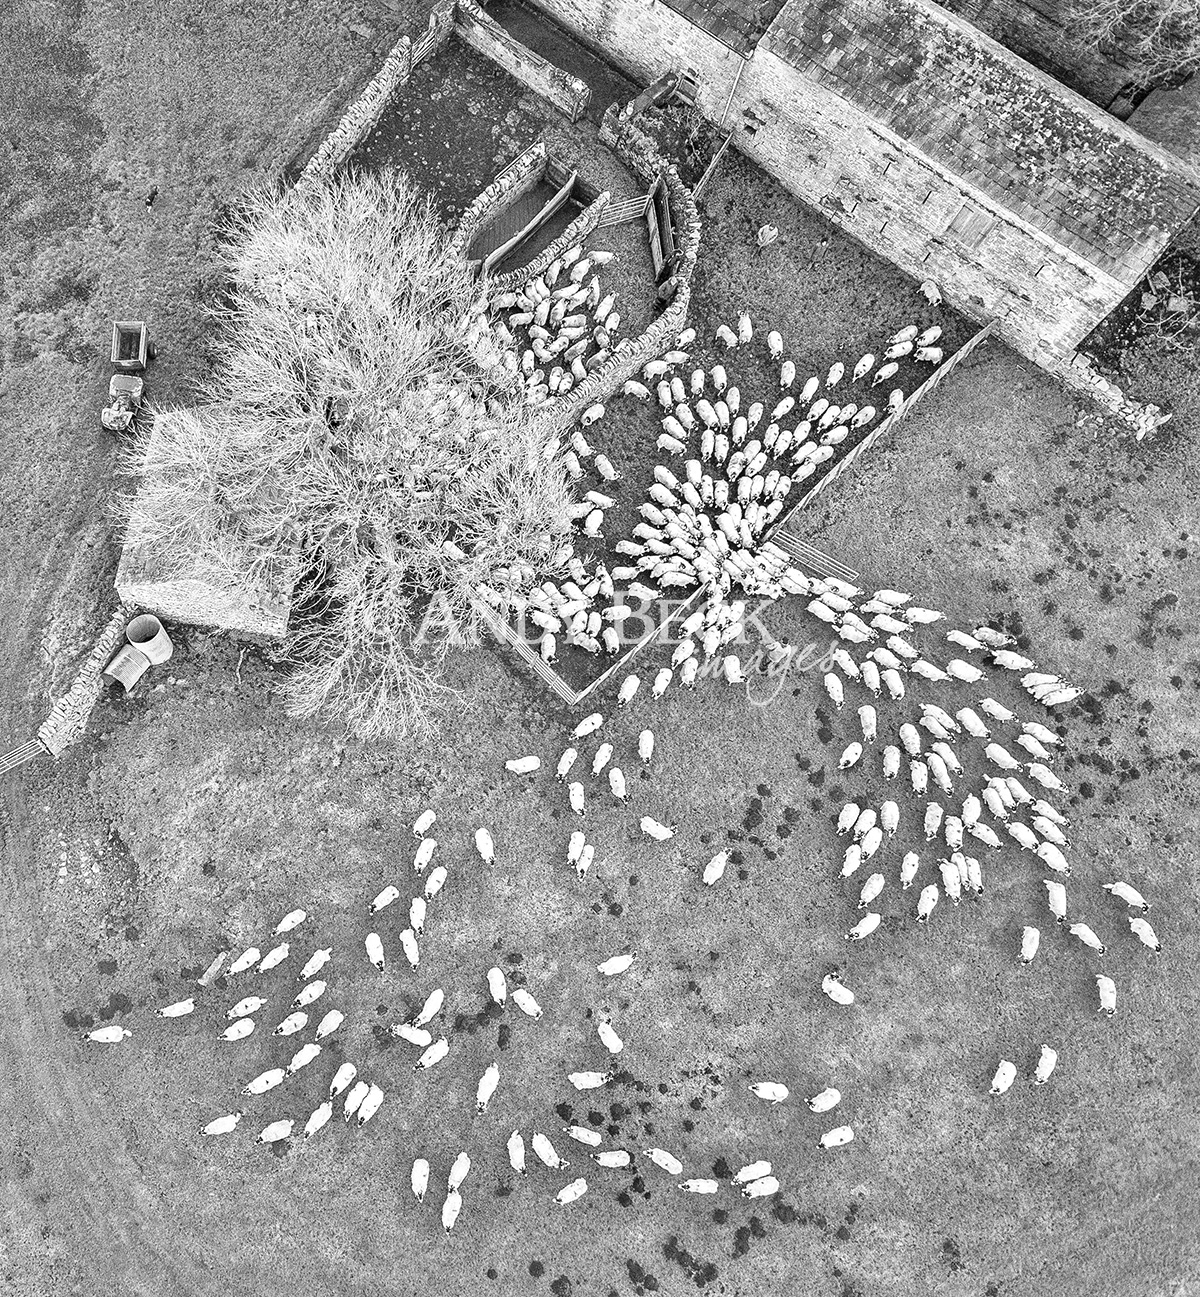 Shedding sheep. A black and white drone photograph of sheep moving out of a pen. Stony Keld near Bowes.